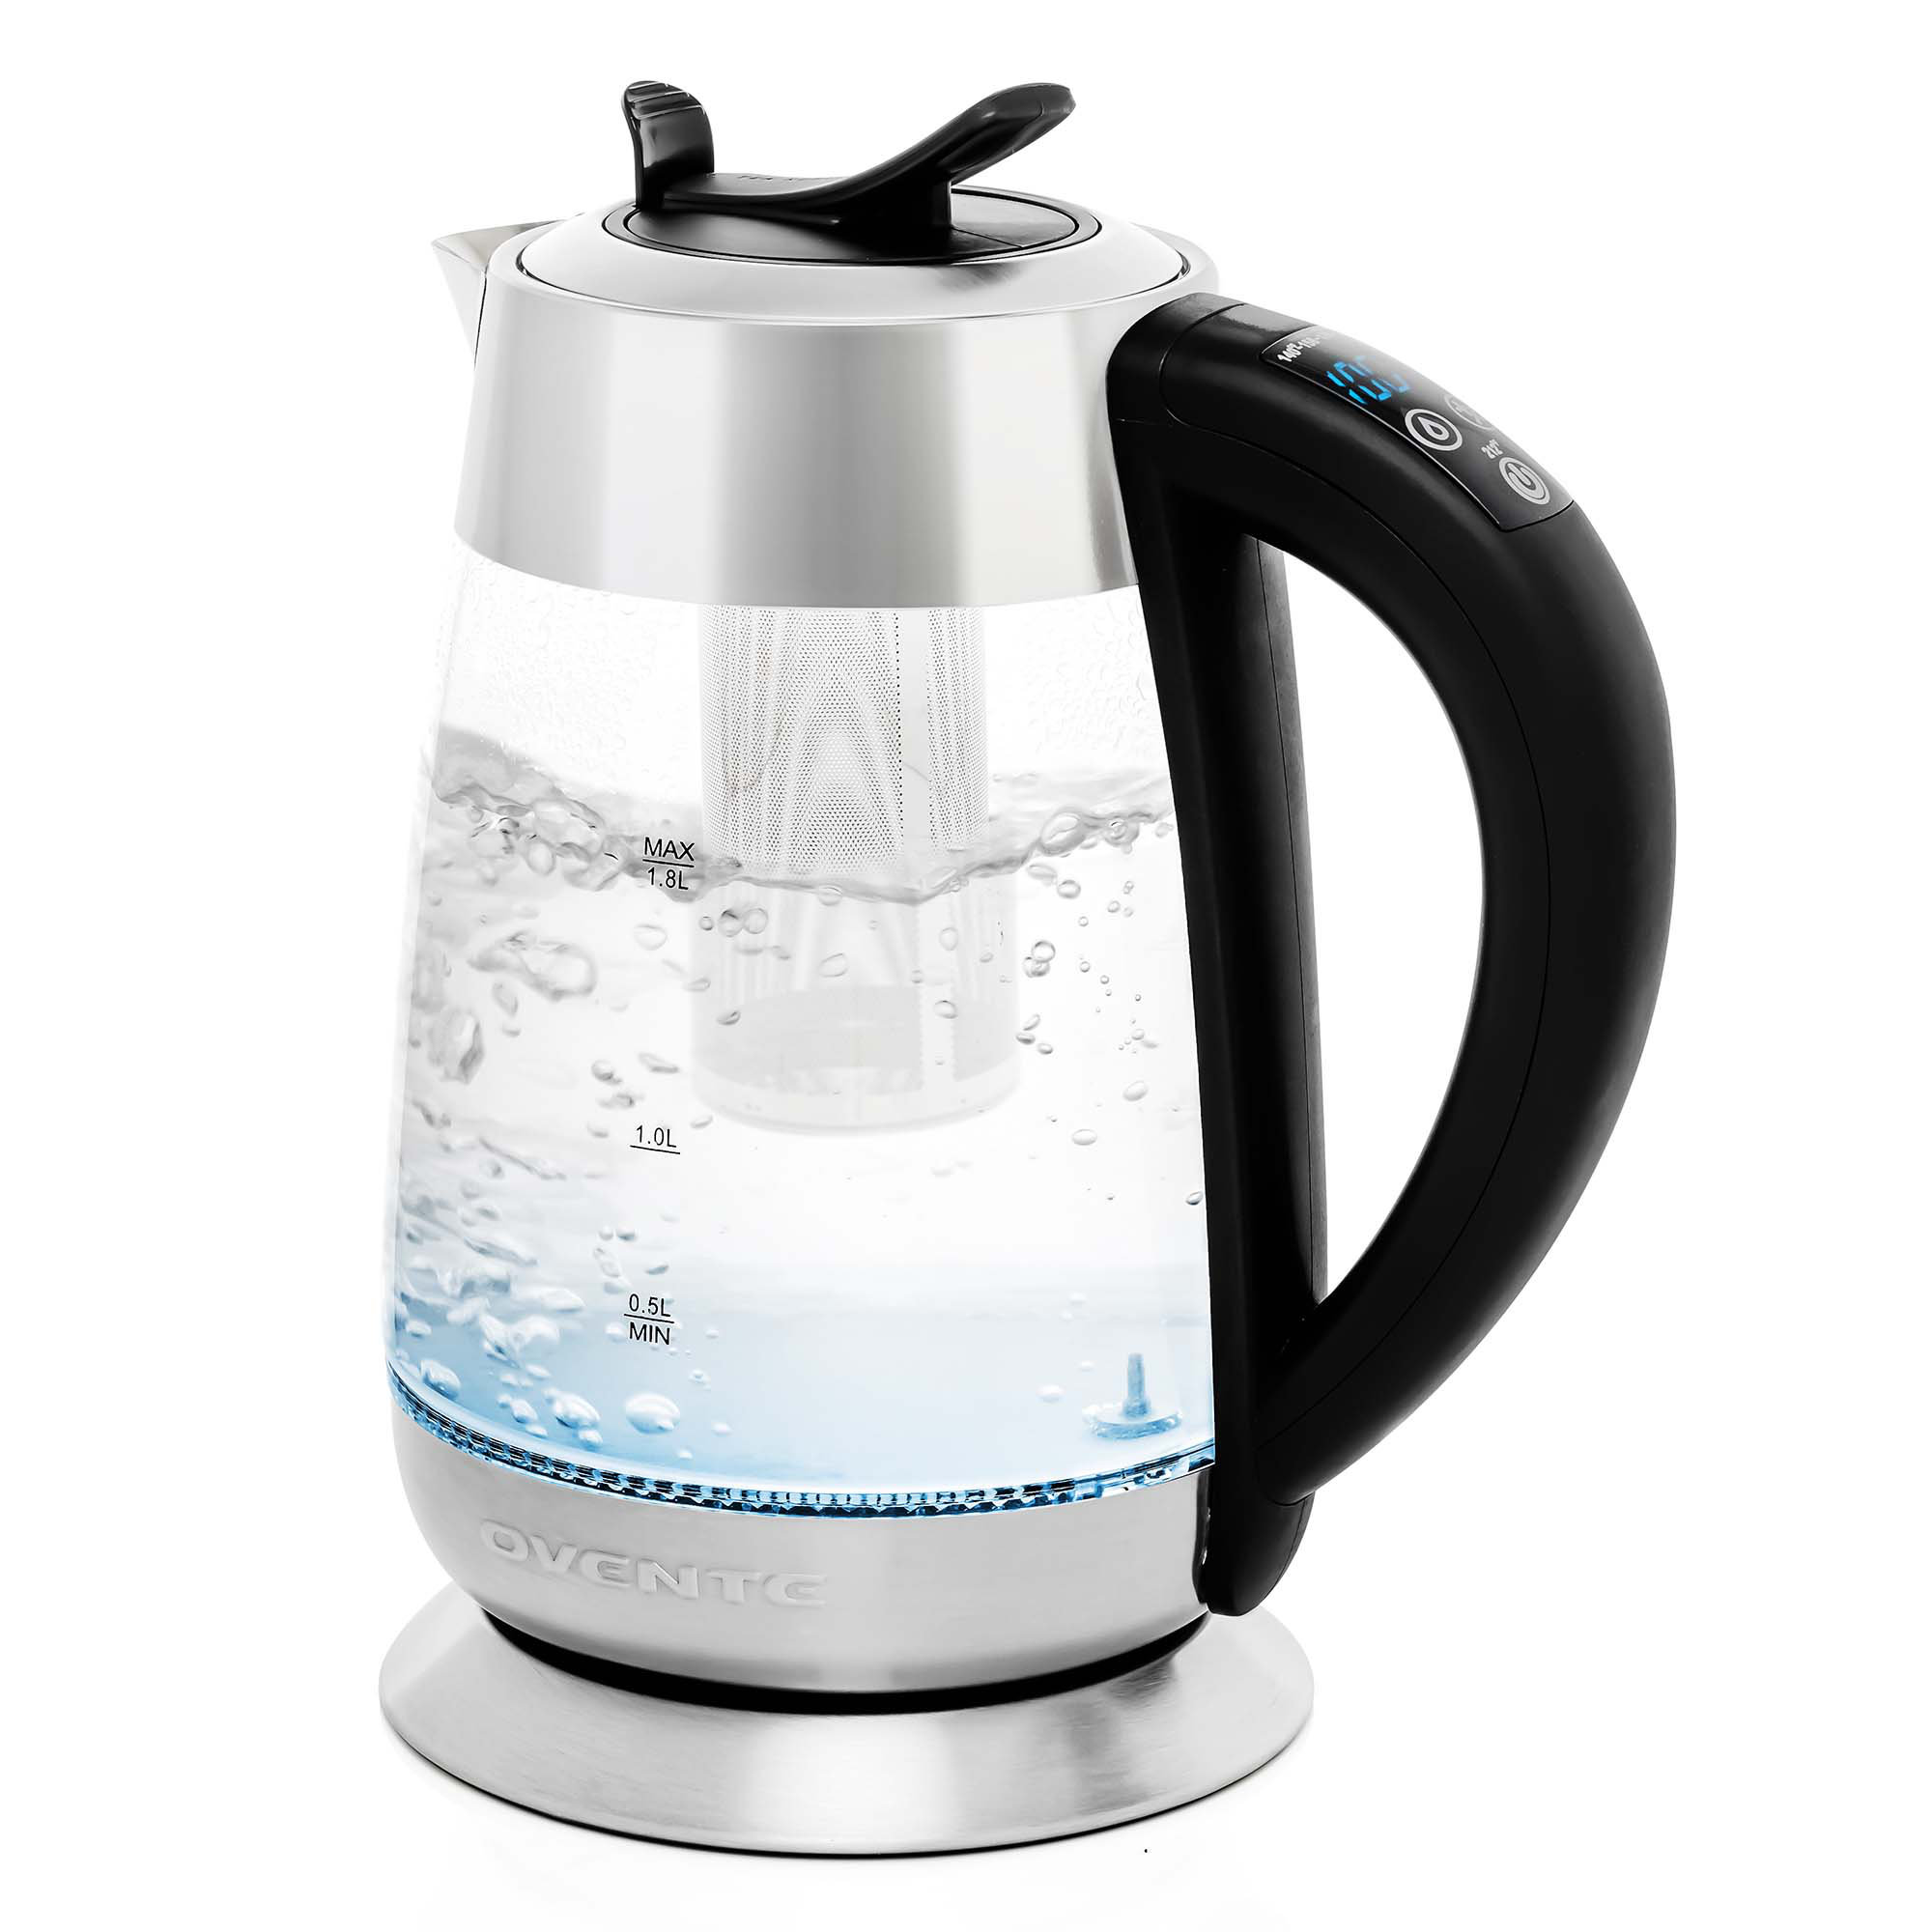 Ovente Portable Electric Glass Kettle 1.5 Liter with Blue LED